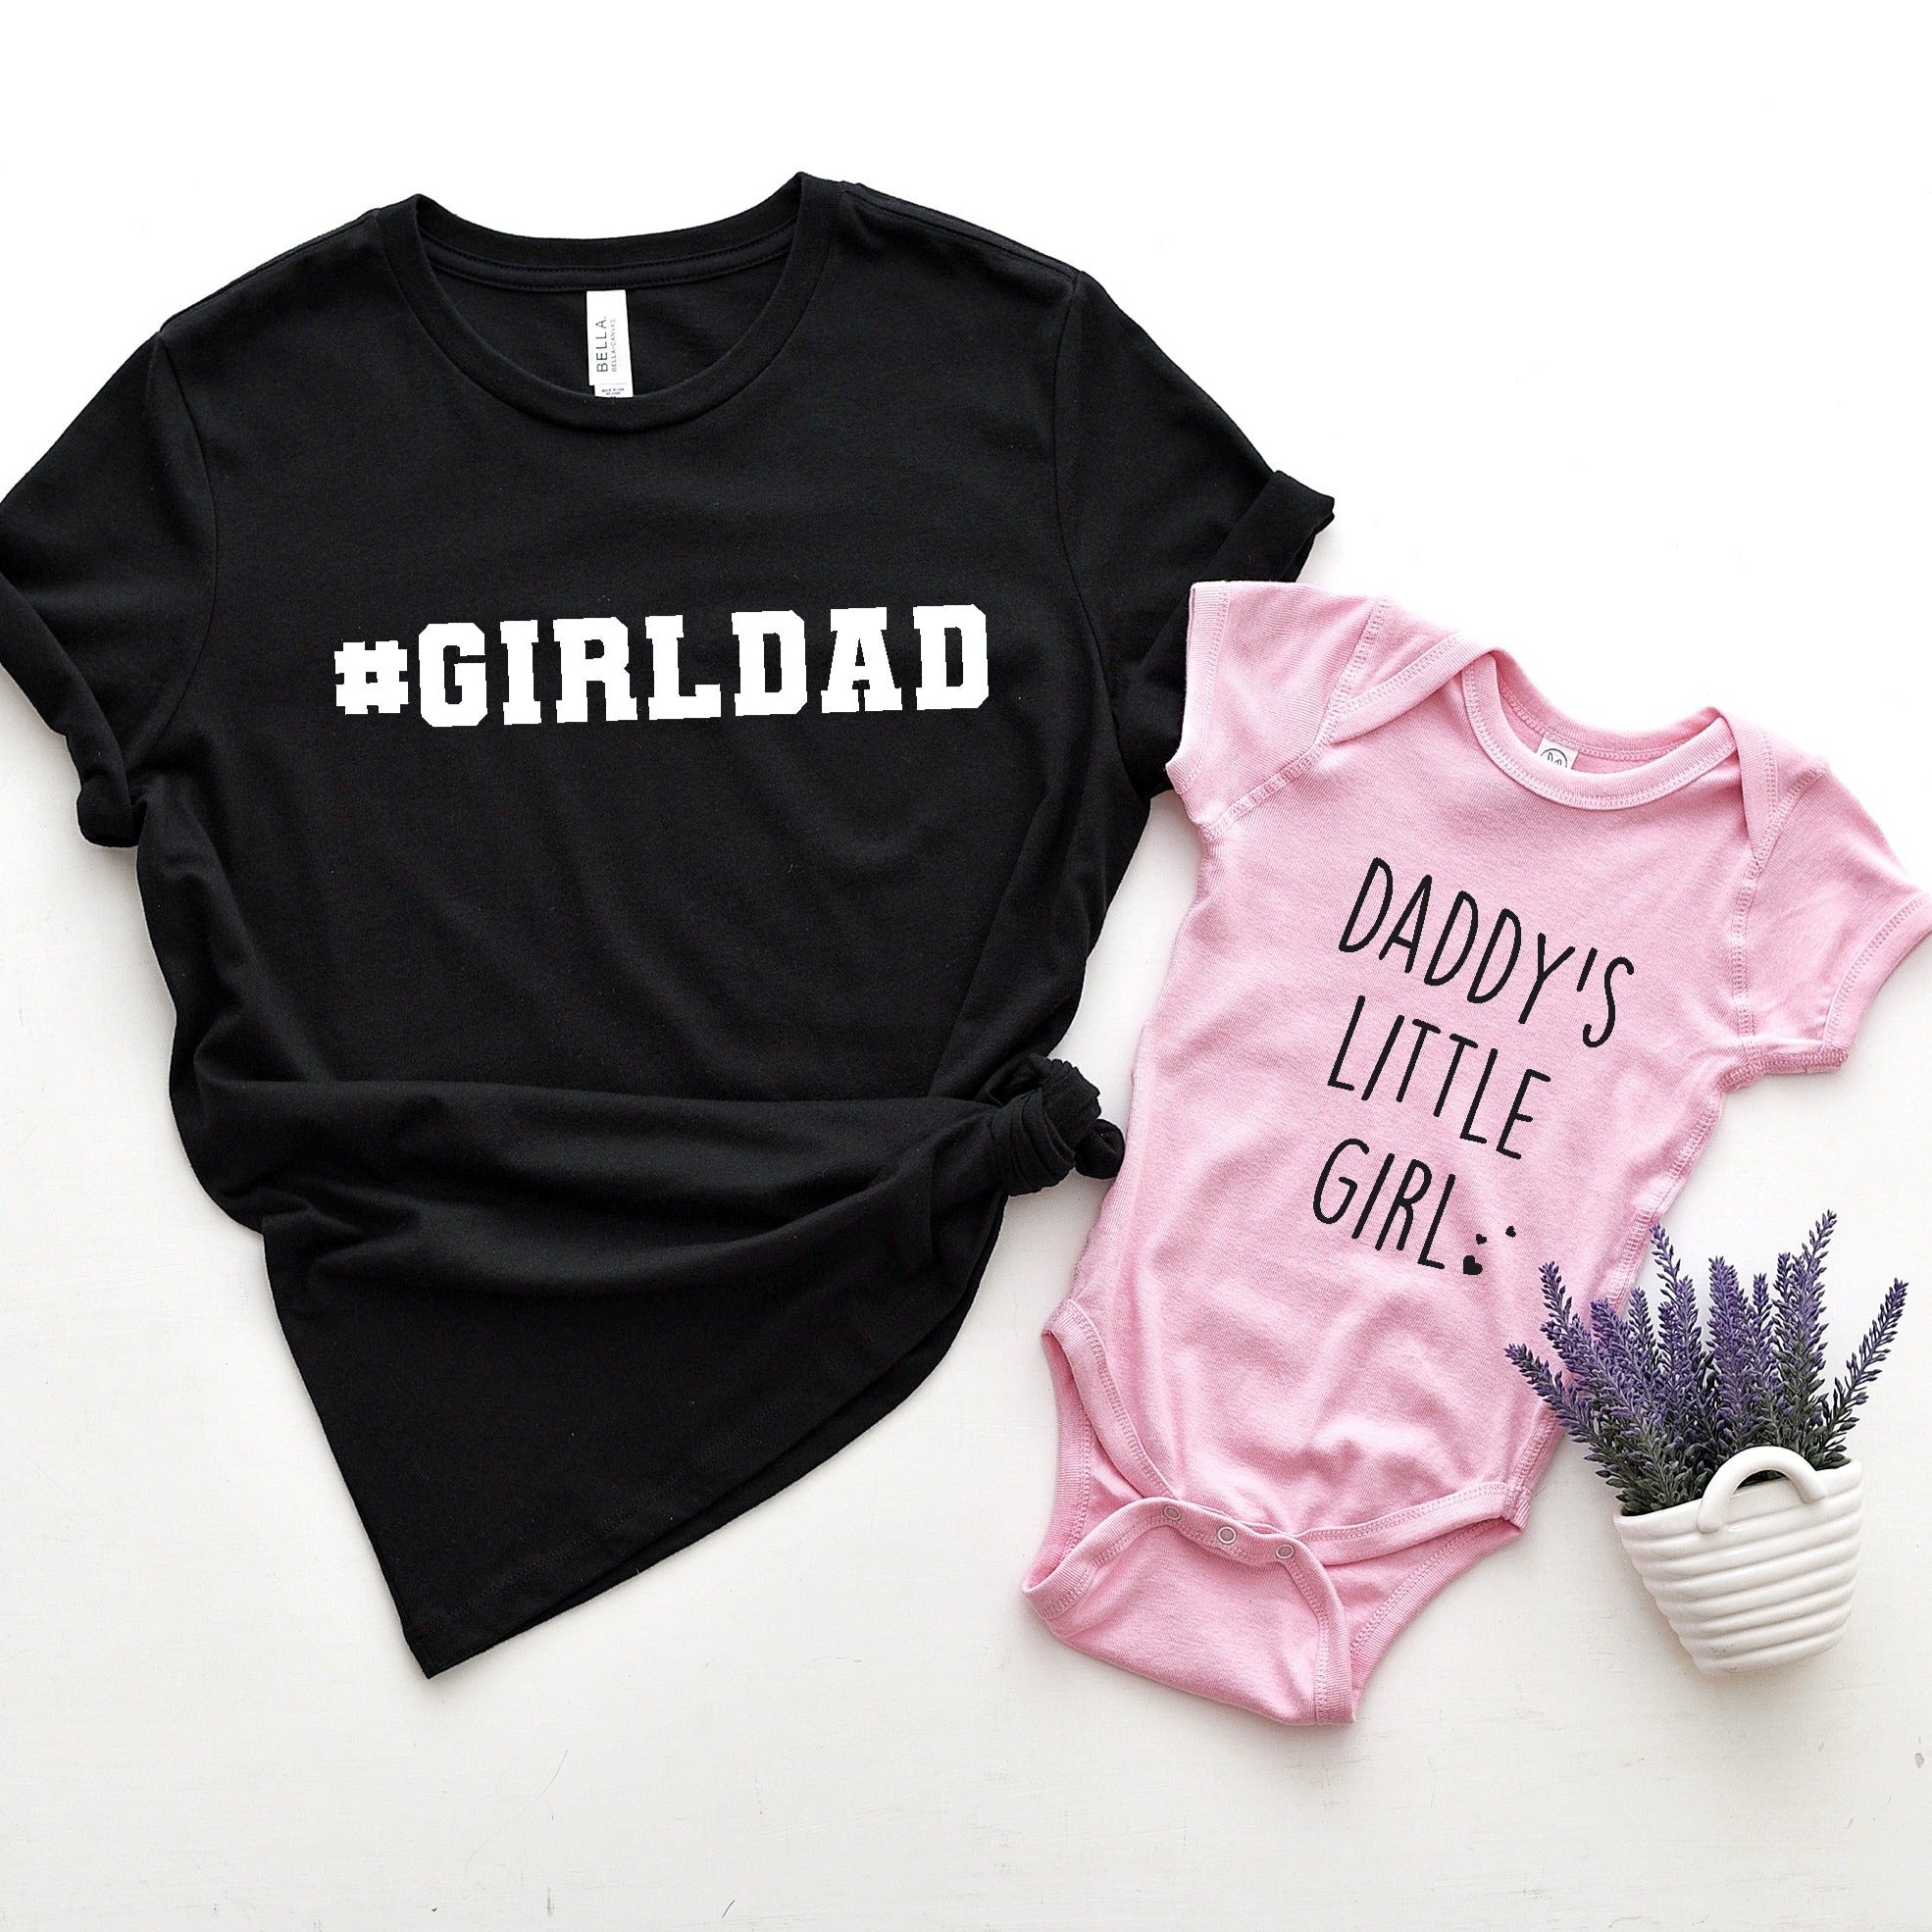 Daddy Daddy's Girl Father Daughter Mens Parent Child Kids Matching T-Shirt  Dad Girl